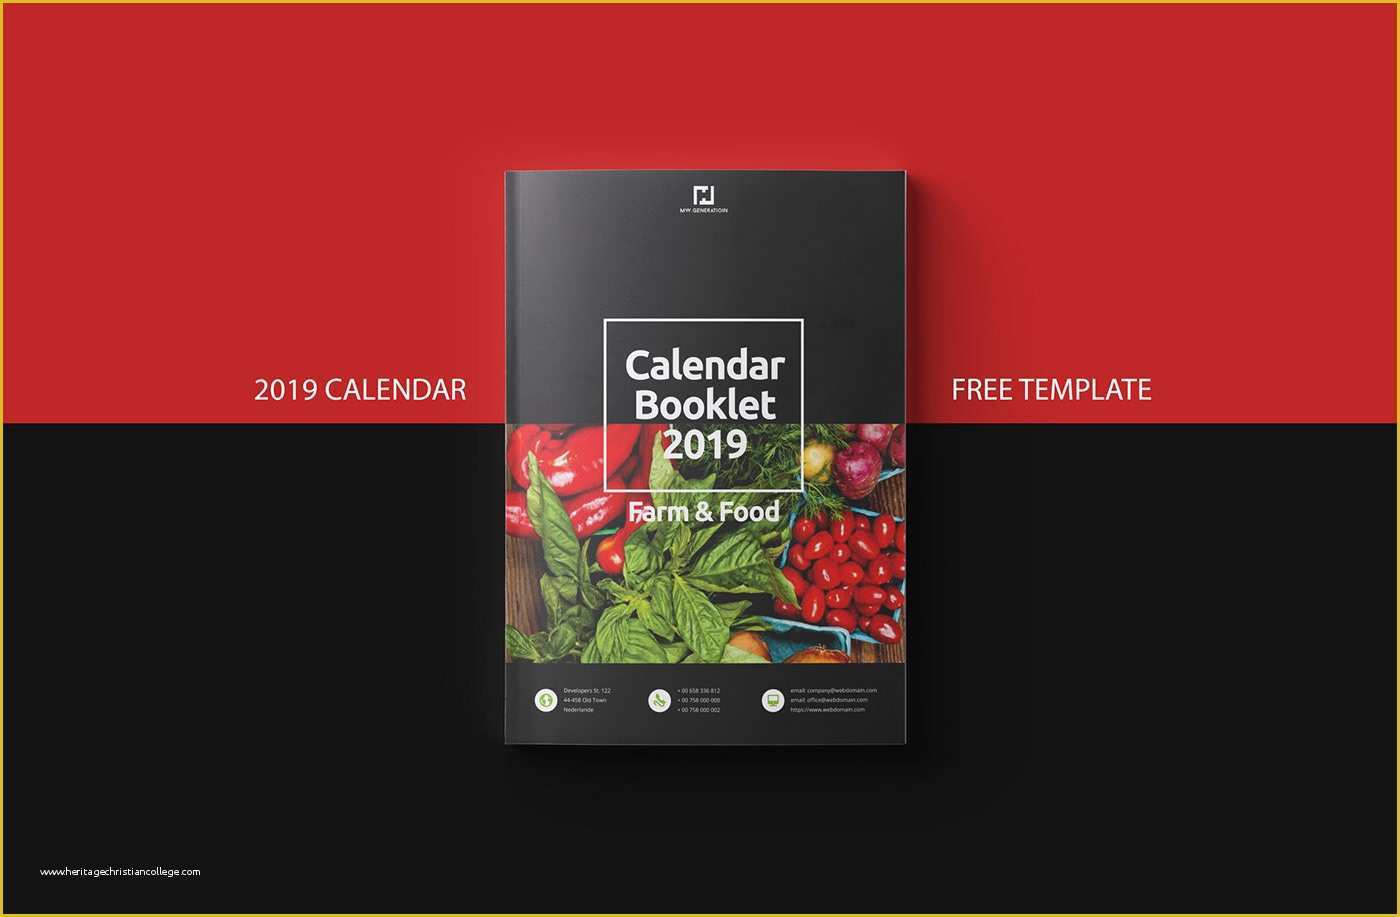 Indesign Templates Free Download Of Free Calendar 2019 Indesign Template On Behance